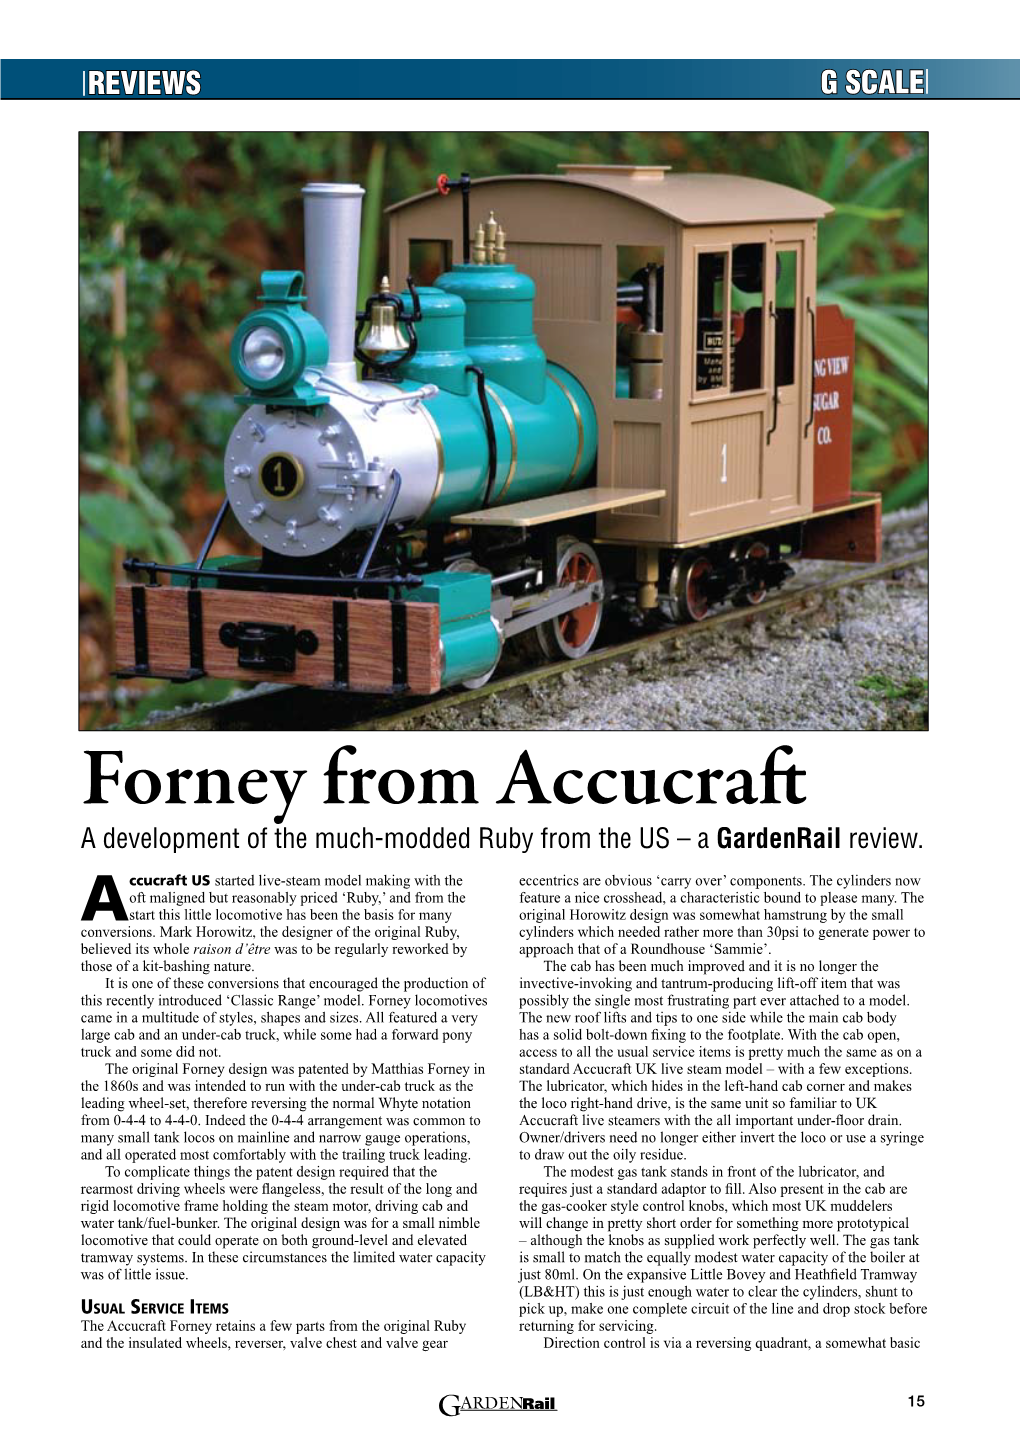 Forney from Accucraft a Development of the Much-Modded Ruby from the US – a Gardenrail Review